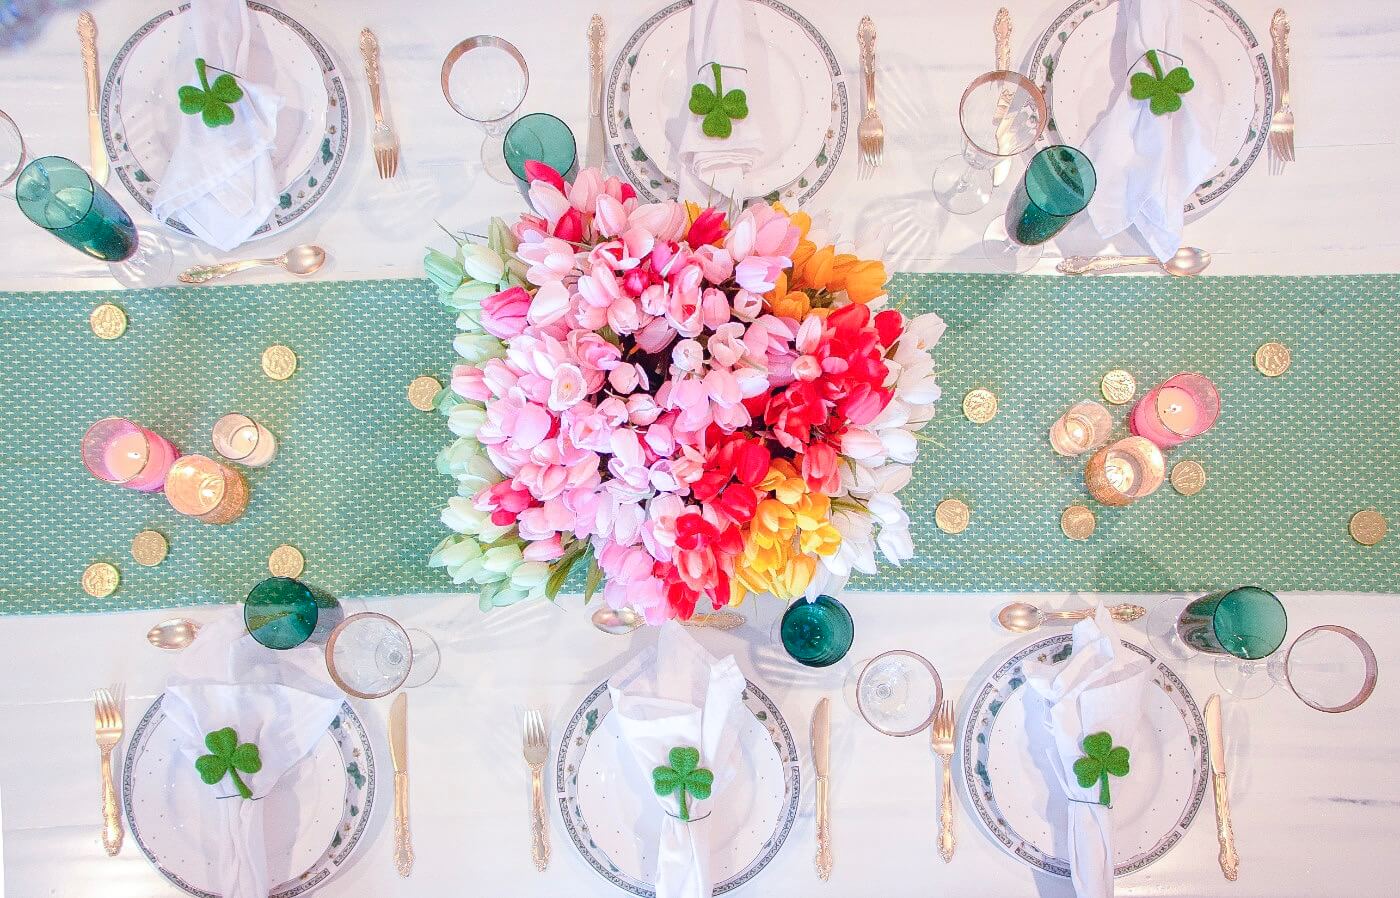 I’m so Lucky to have You – St. Patricks Day Tablescape